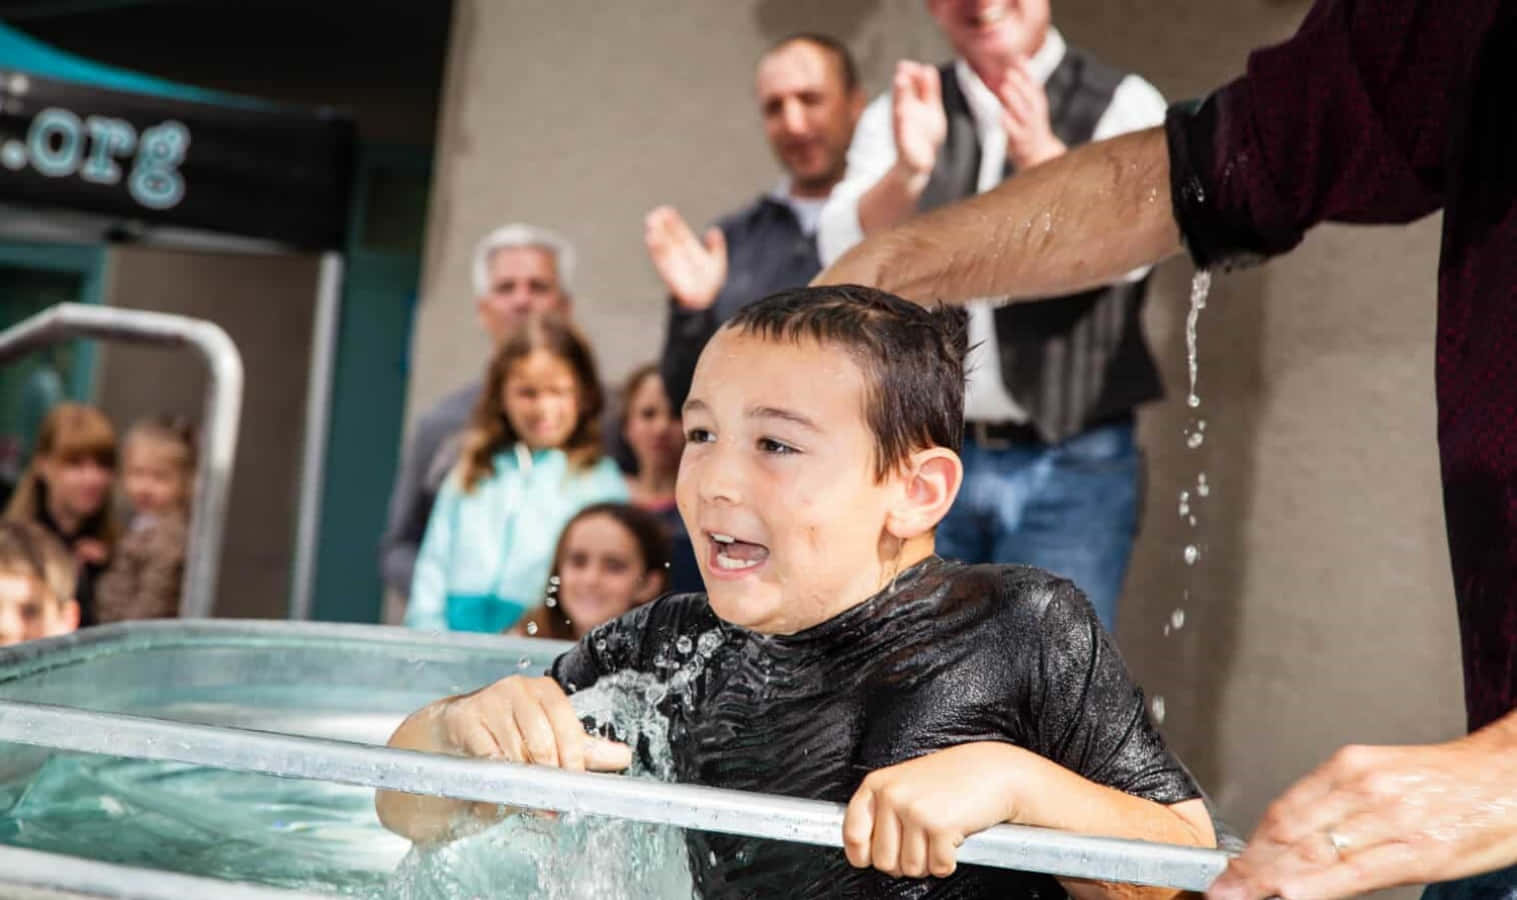 Celebrating life and faith with a Baptism ceremony